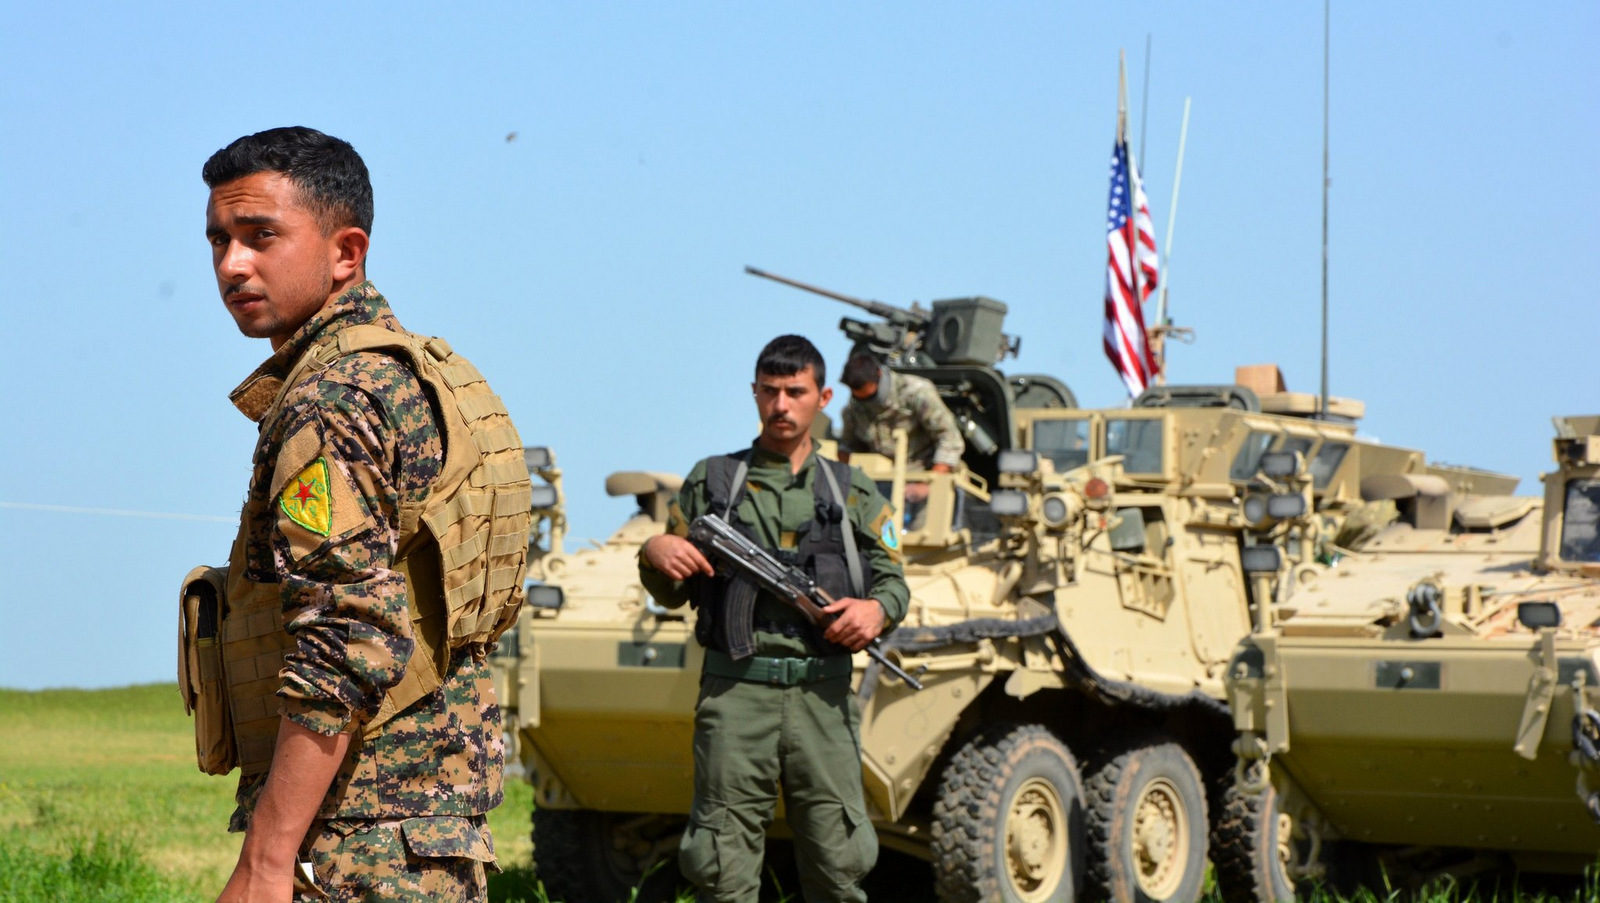 Kurdish fighters from the People’s Protection Units, (Y.P.G), stand guard next to American armored vehicles at the Syria-Turkey border